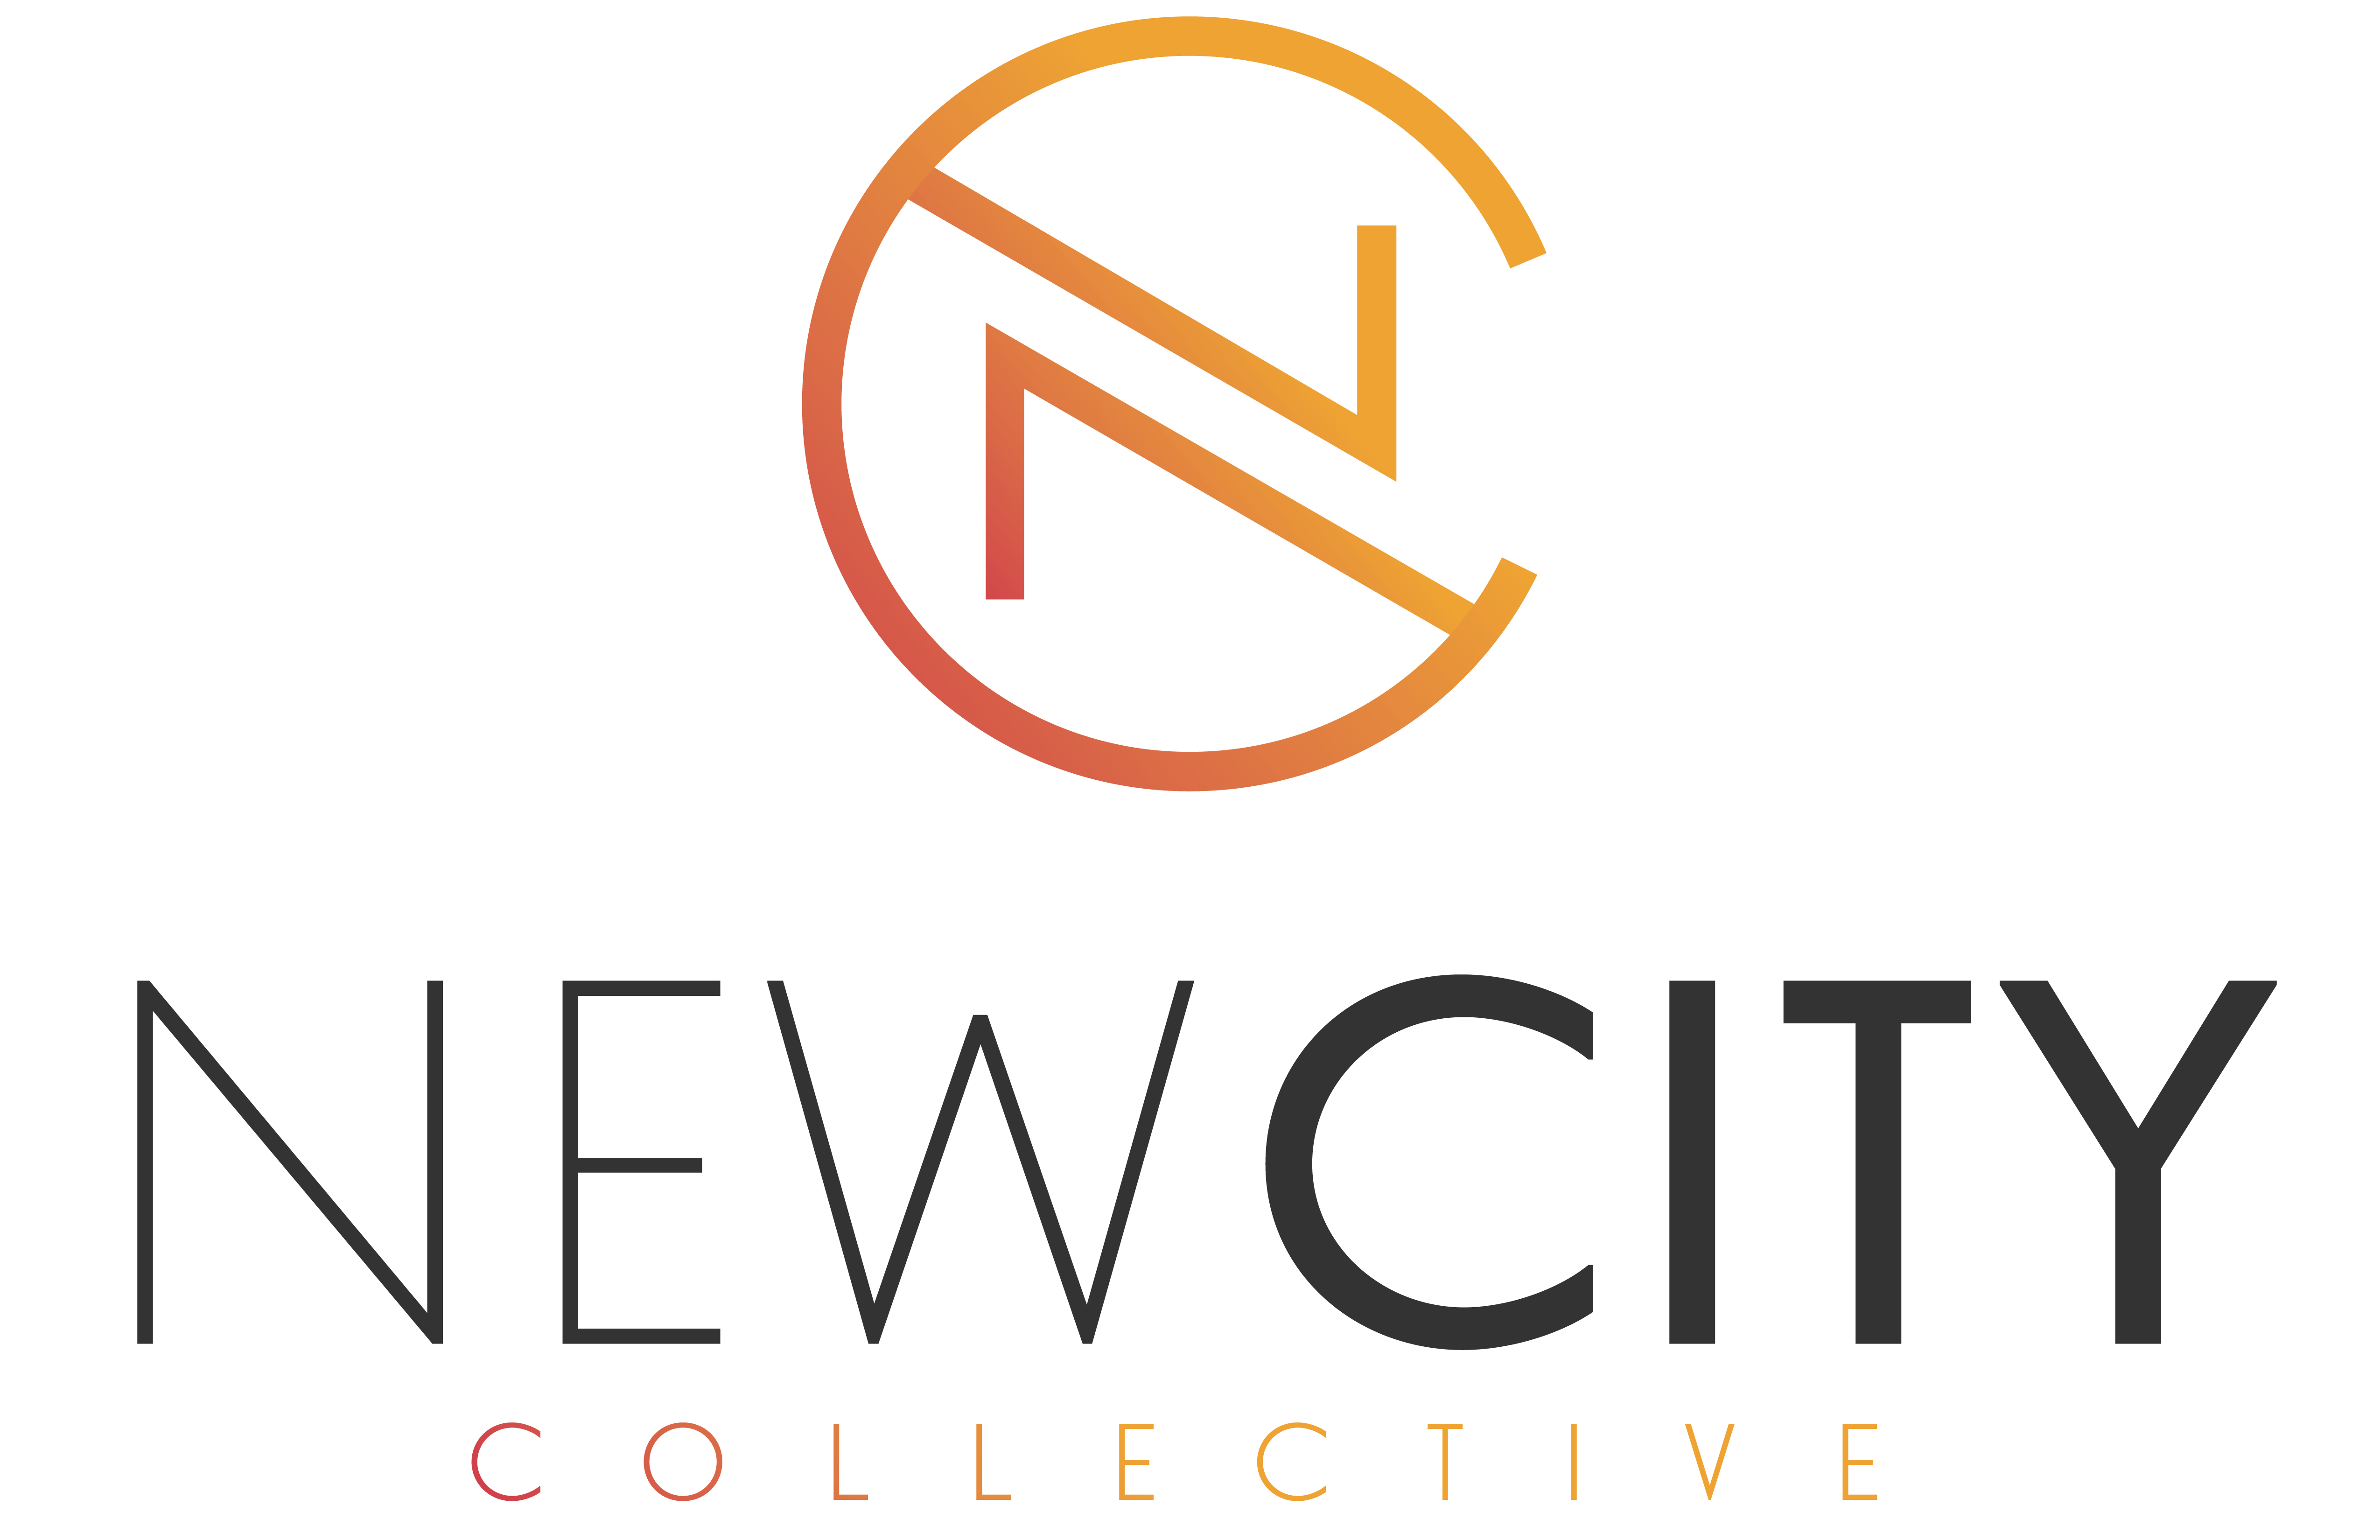 New City Collective